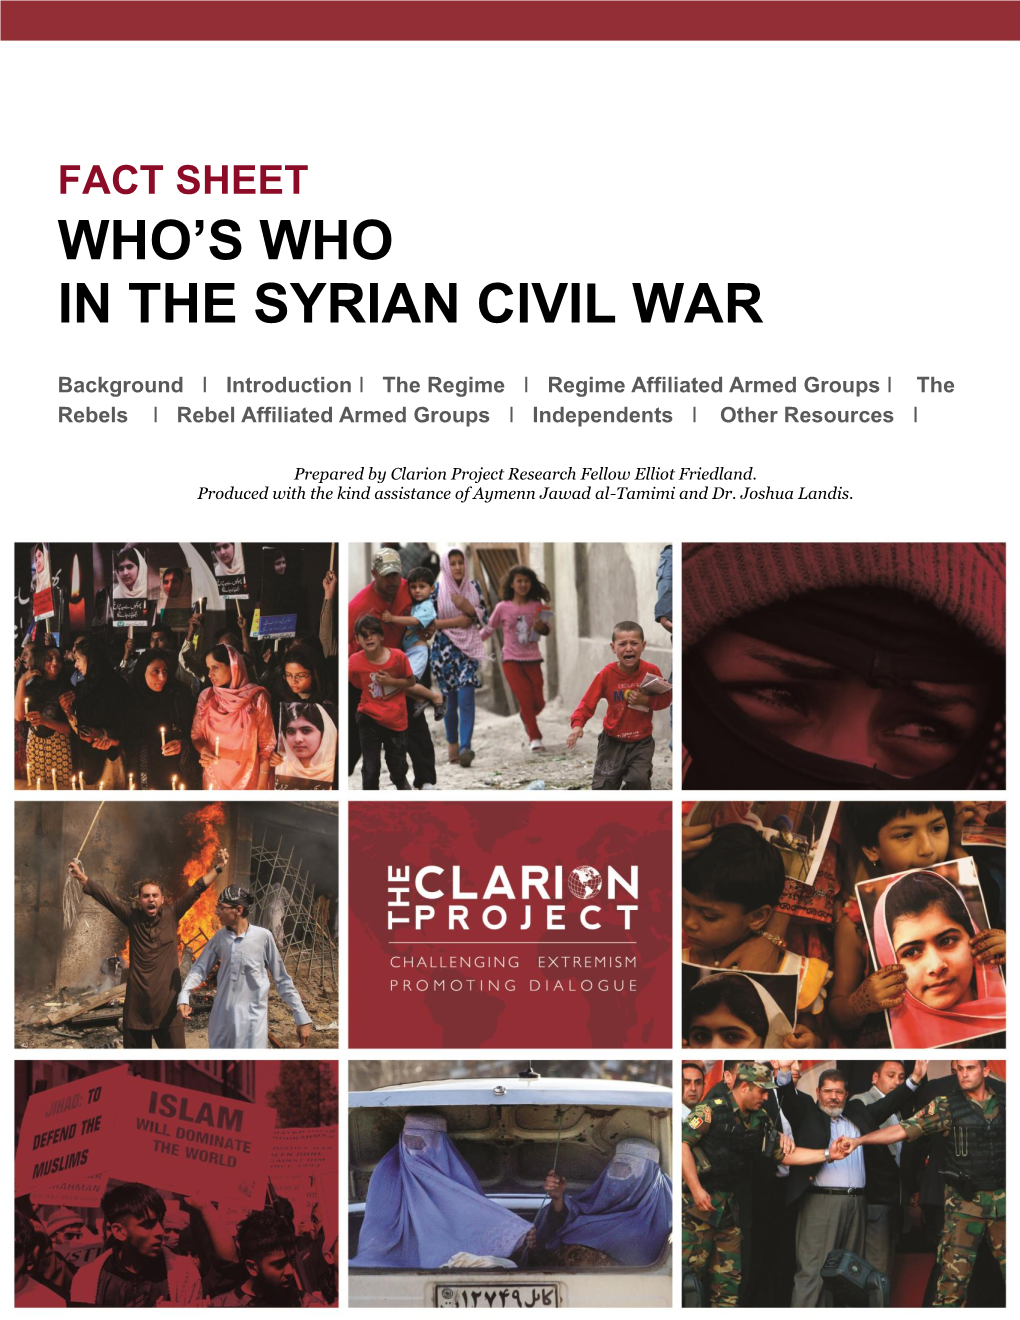 Who's Who in the Syrian Civil